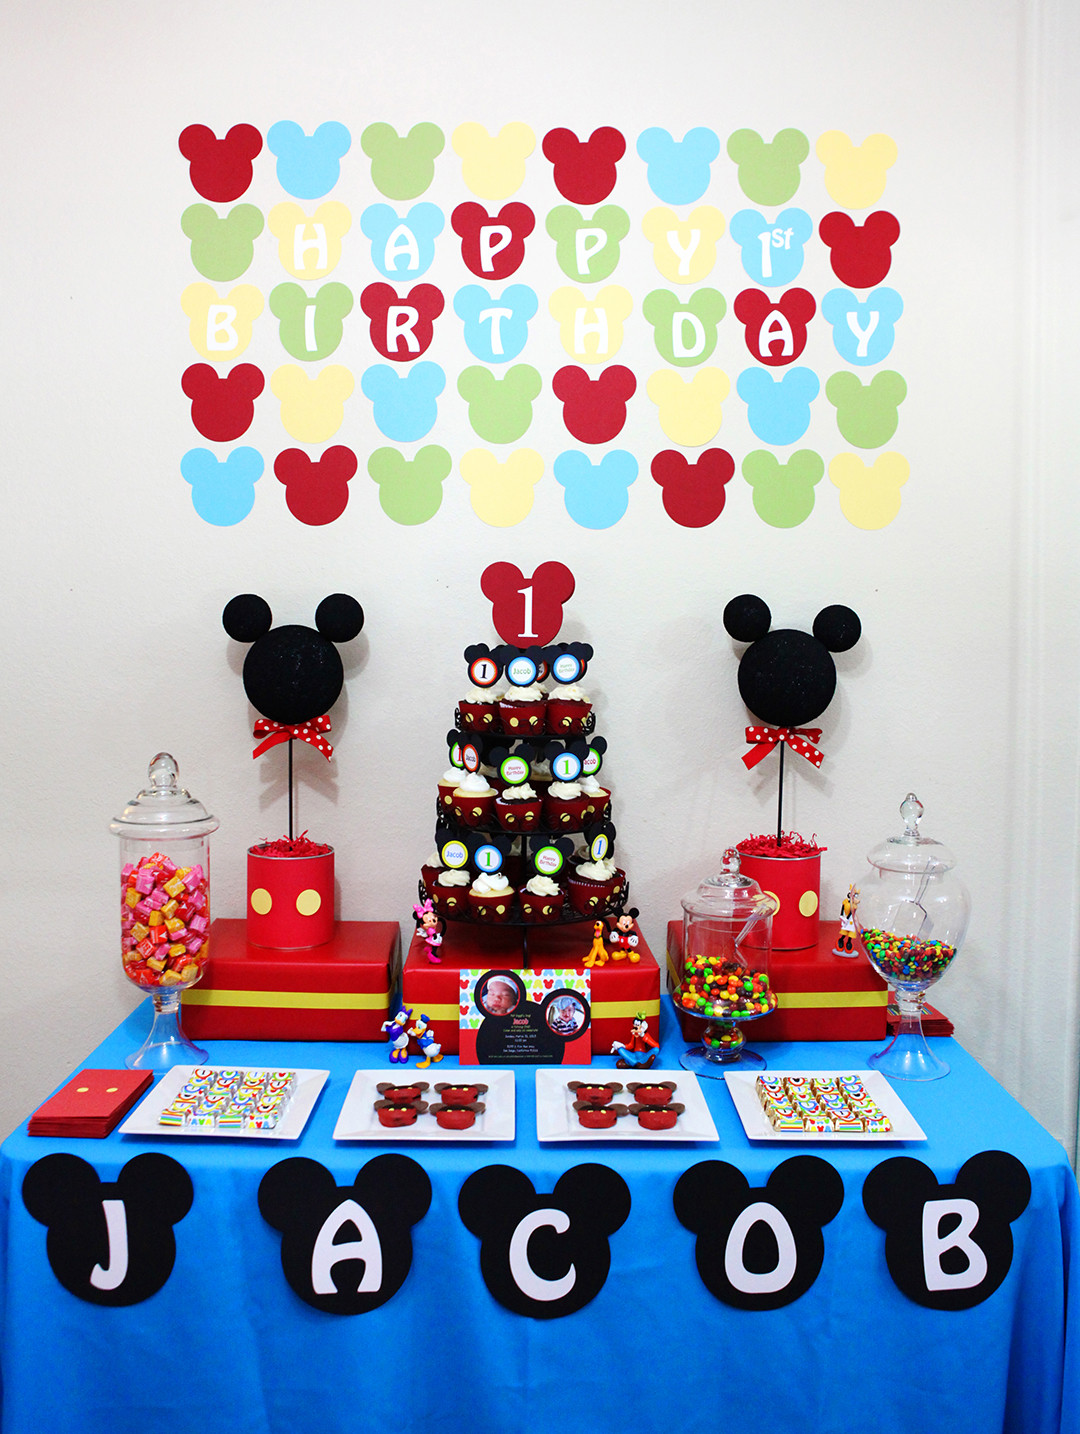 Mickey Mouse First Birthday Party Ideas
 Invitation Parlour Mickey Mouse Birthday Party